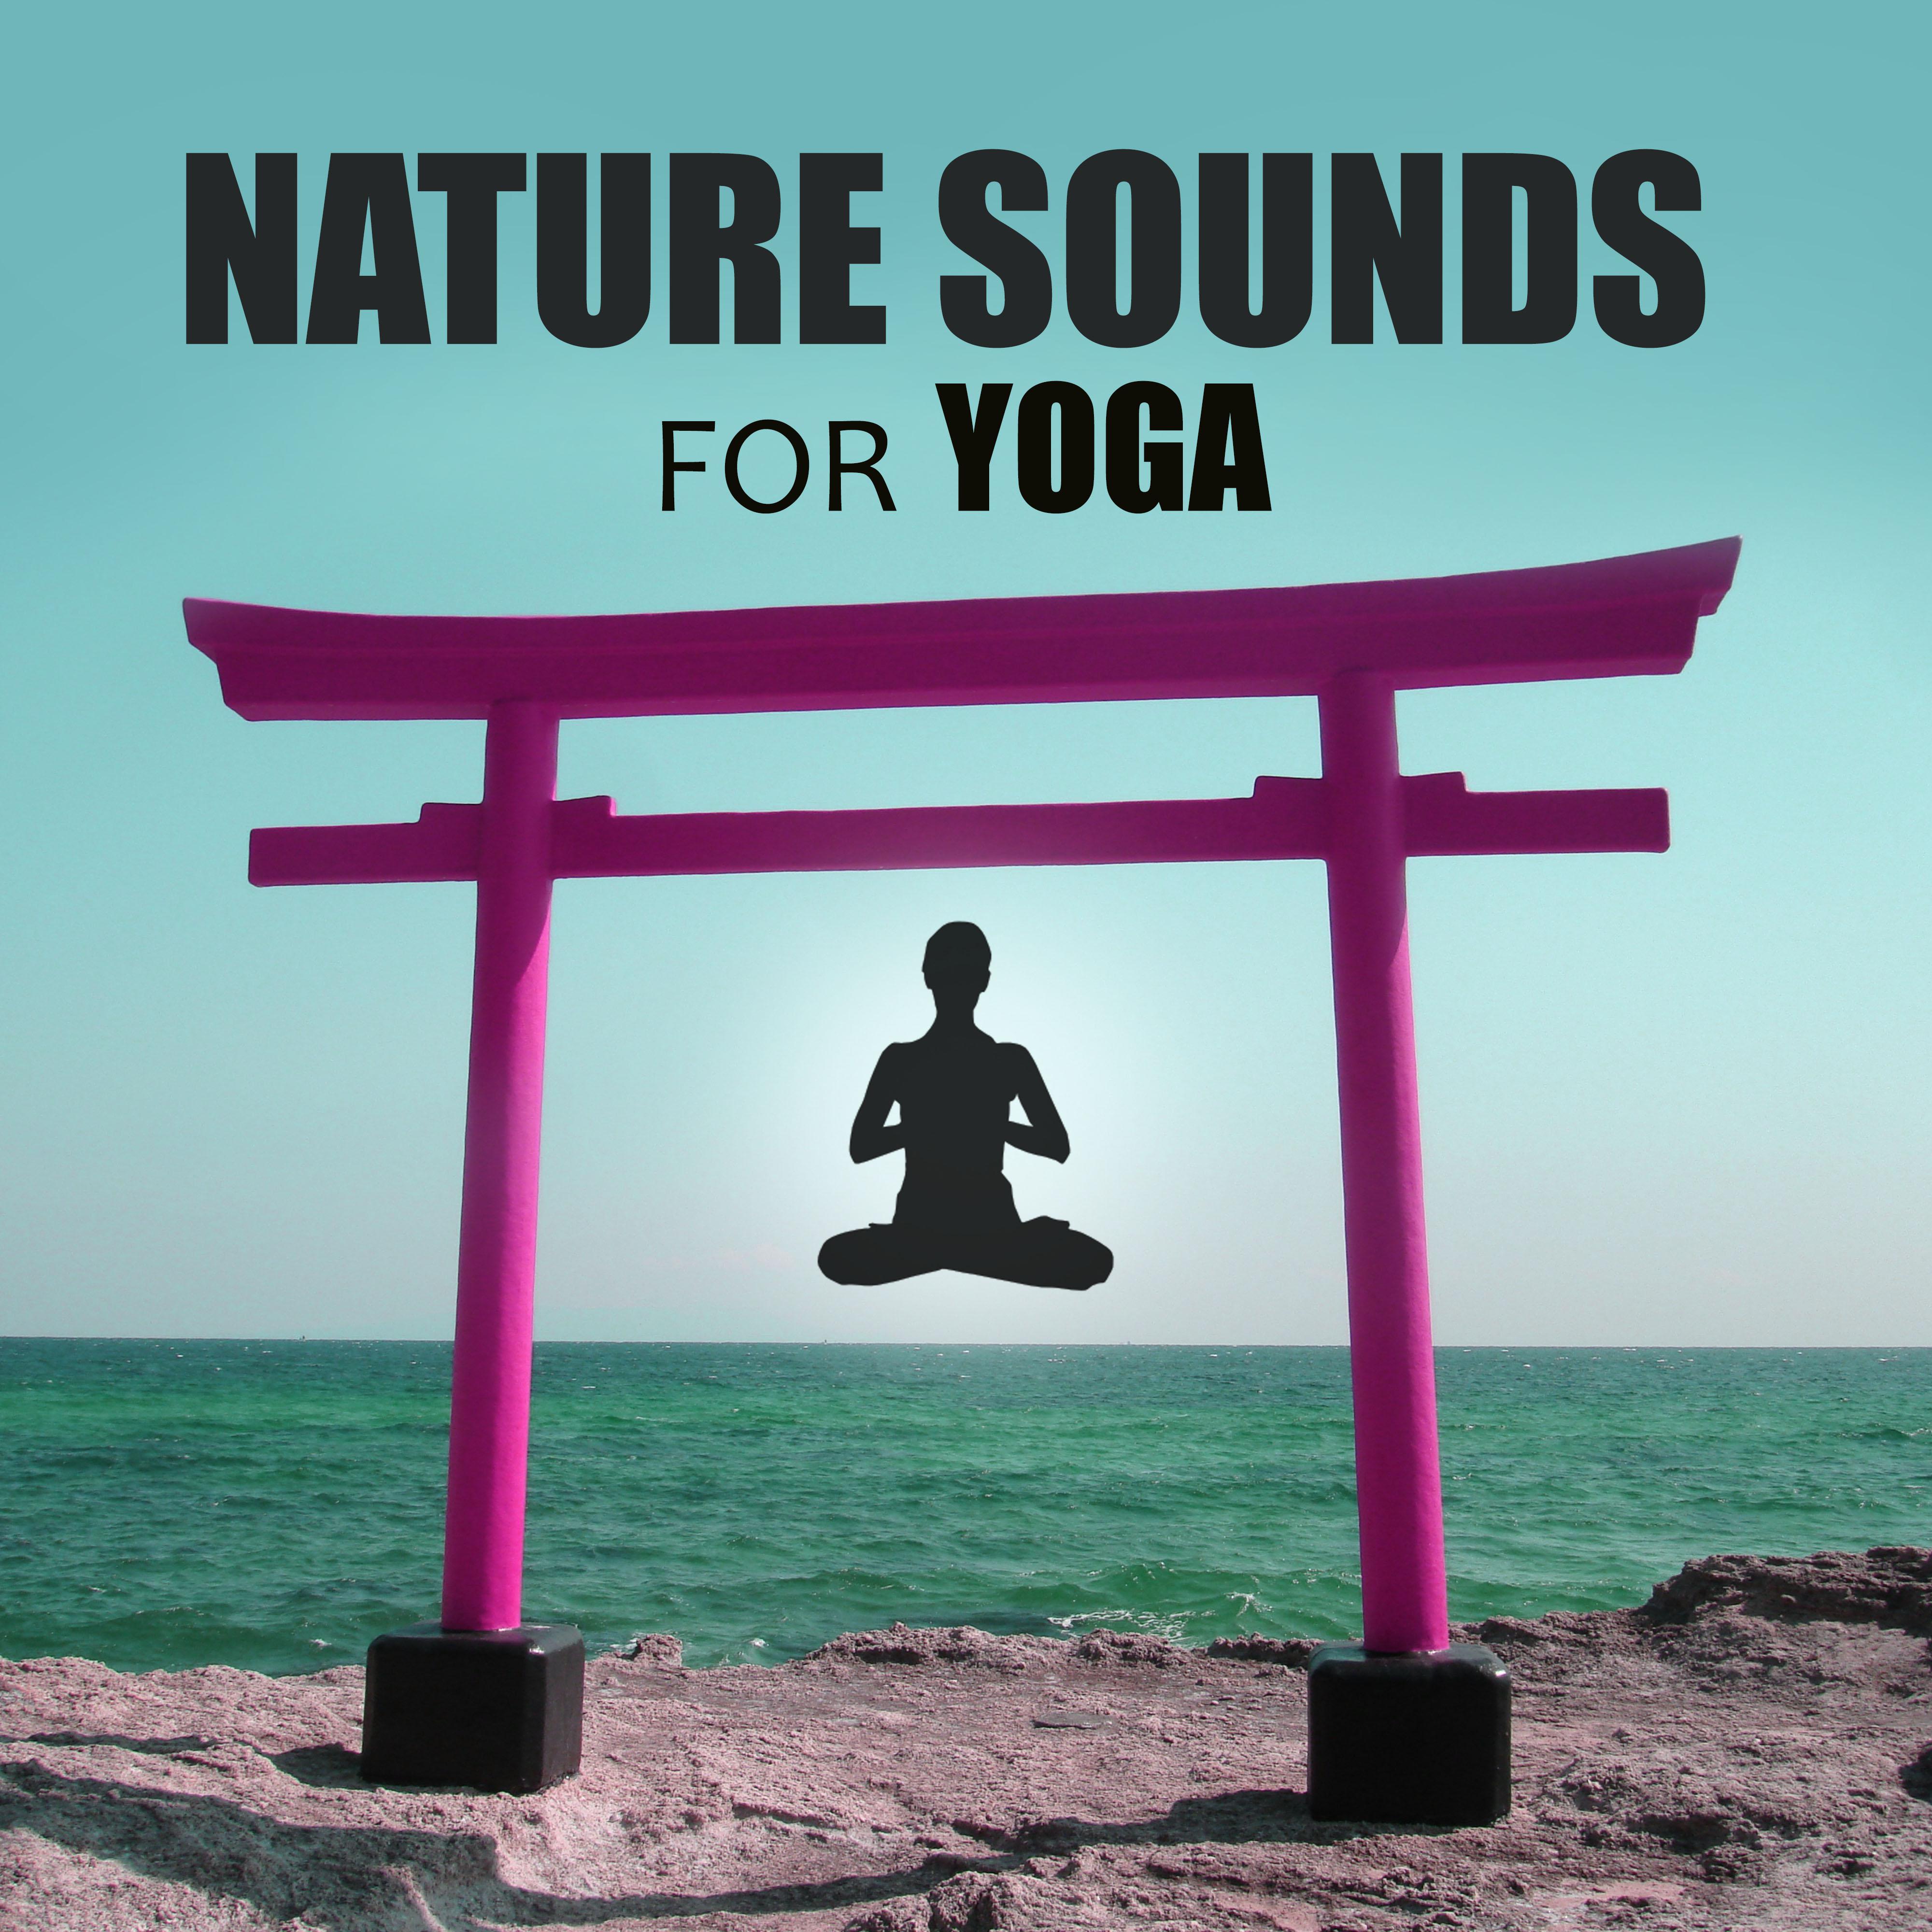 Nature Sounds for Yoga -  Best New Age Music for Meditation & Yoga Excercises, Reiki Music with Nature Sounds,  Deep Relax Therapy